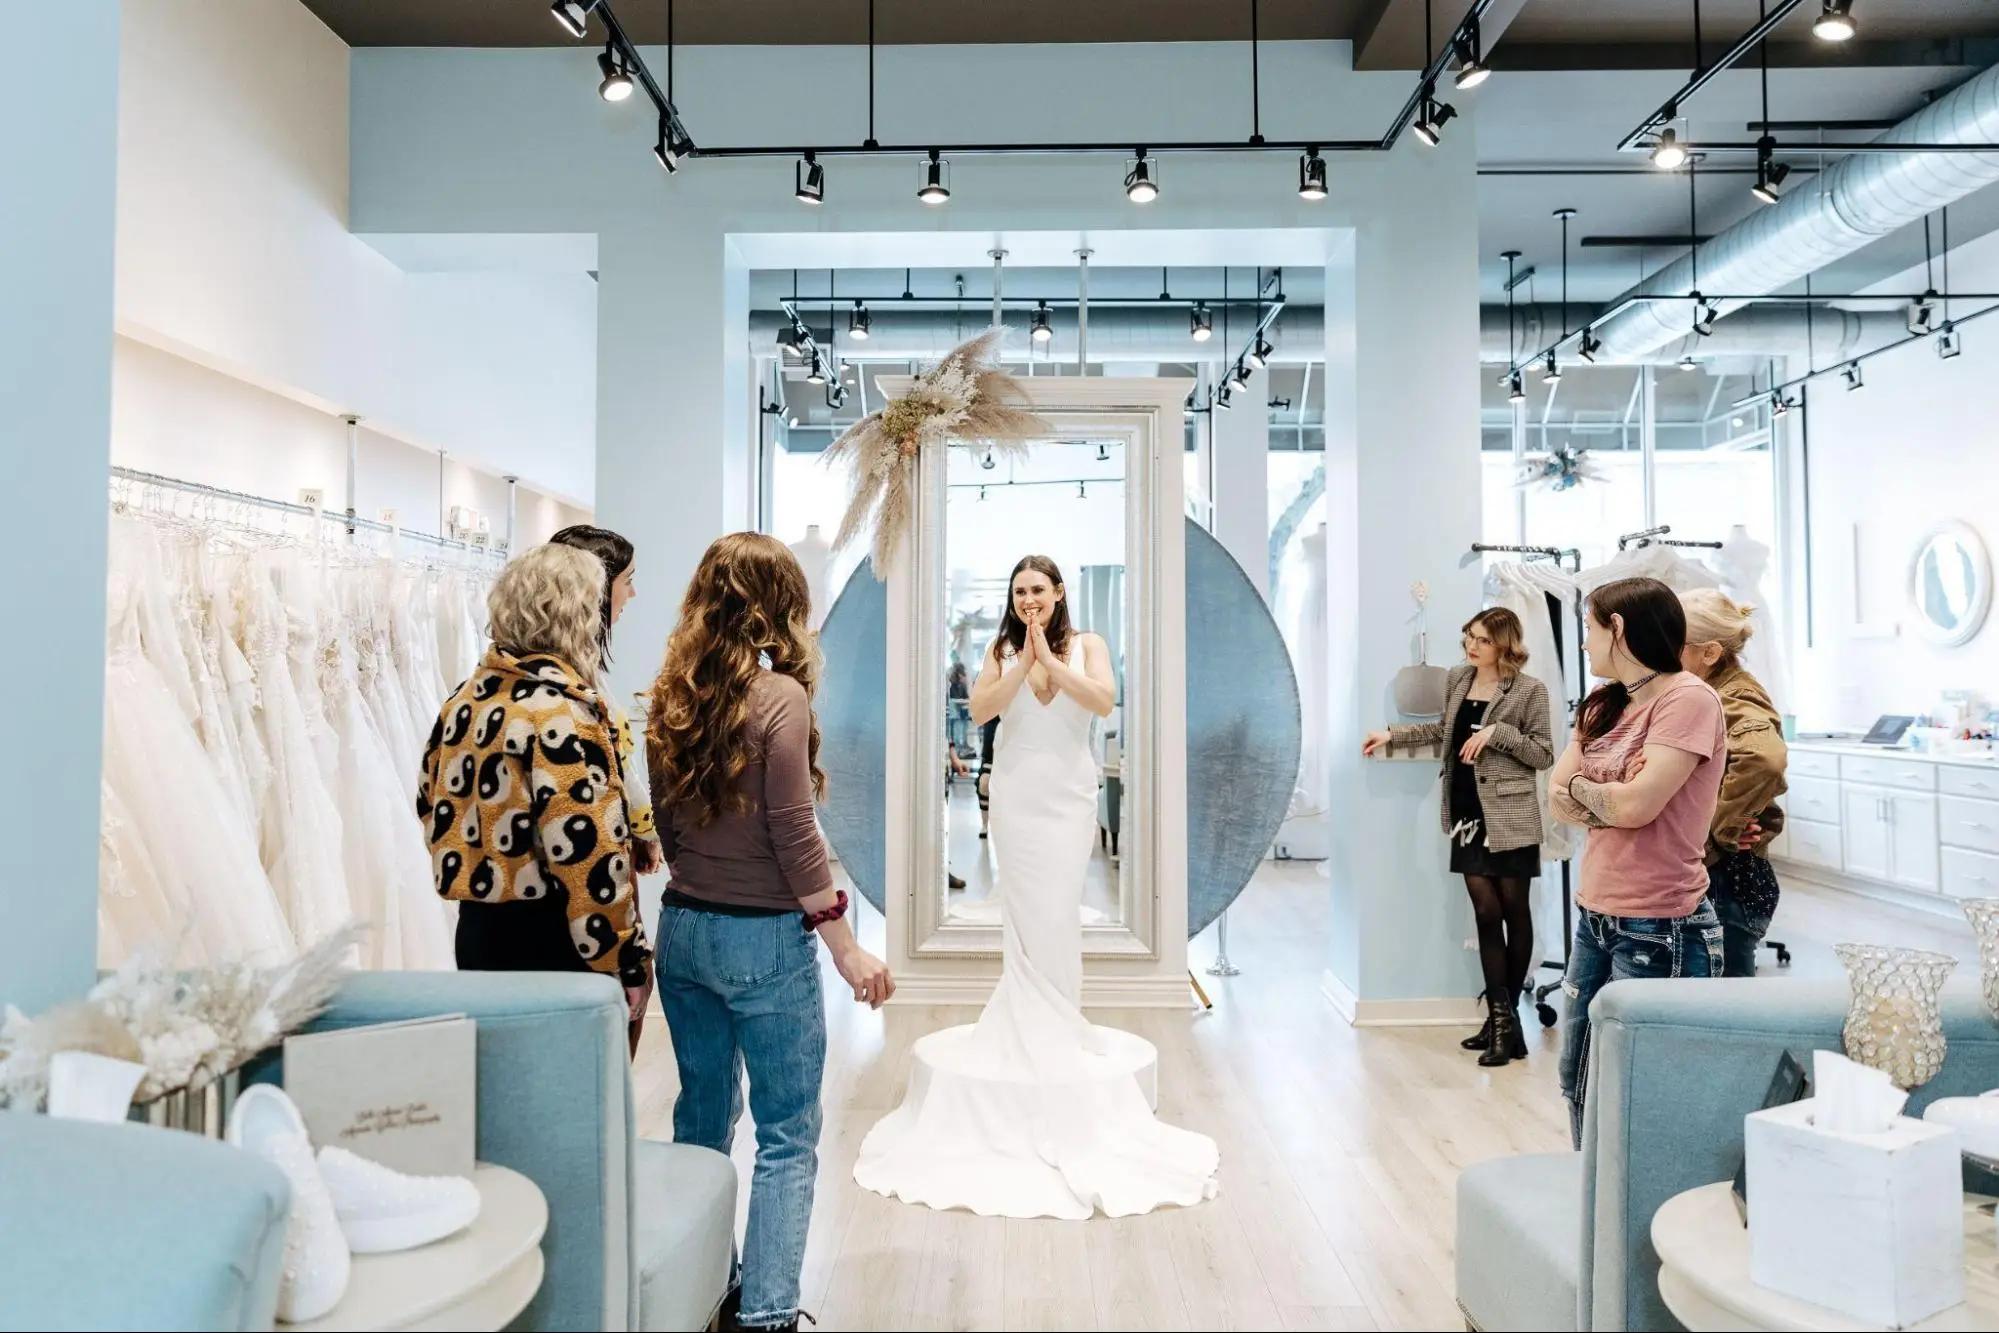 The Ultimate Bridal Experience Image